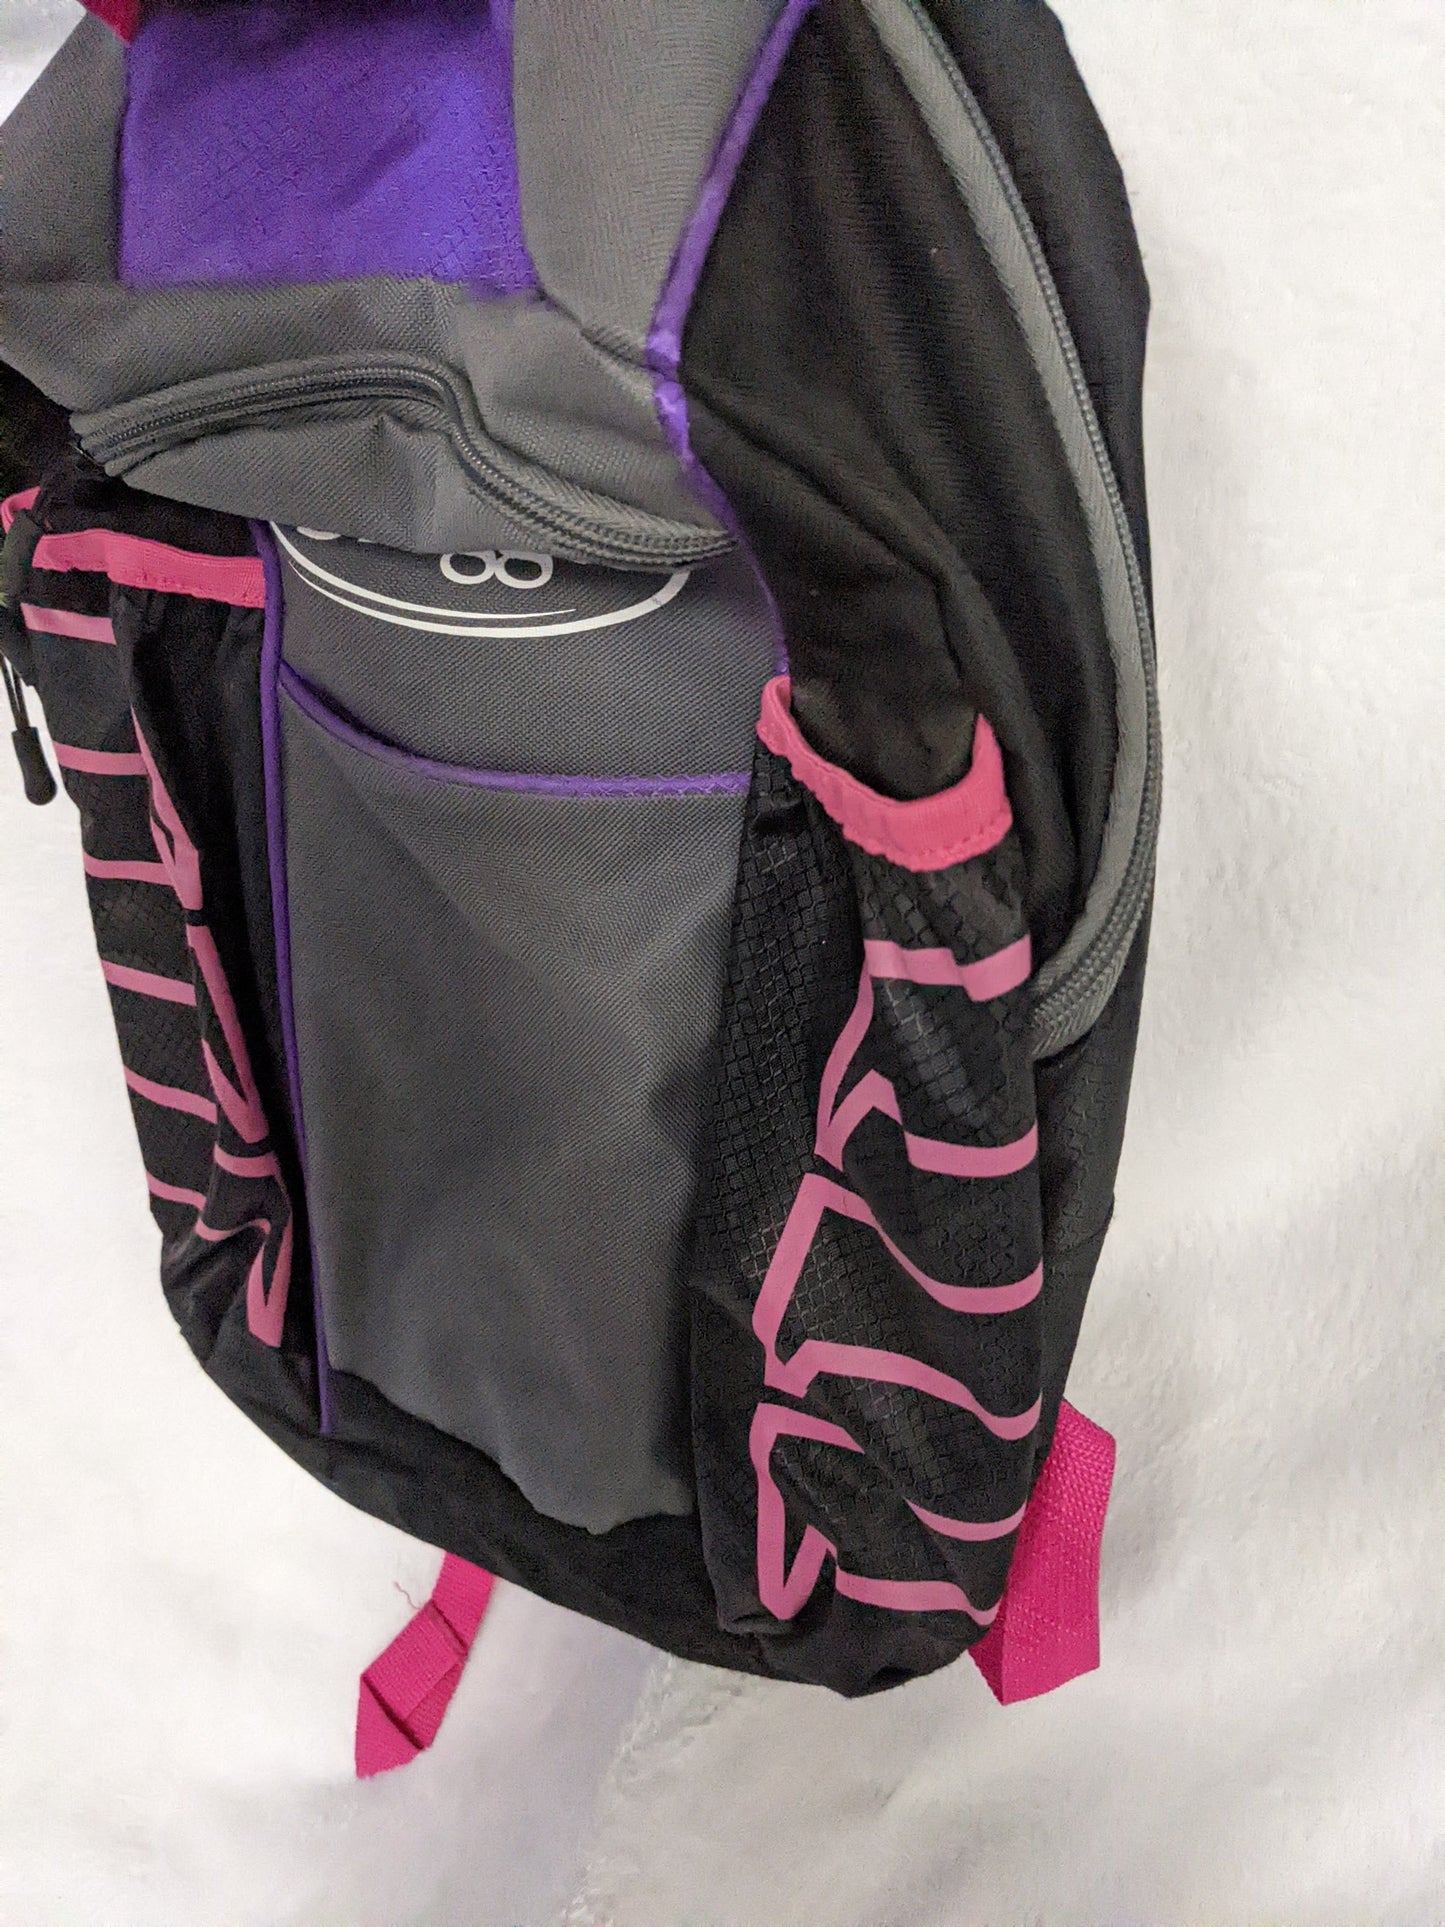 Louisville Slugger Baseball/Softball Gear Backpack Size 18 In x 12 In x 9 In Color Purple Condition Used